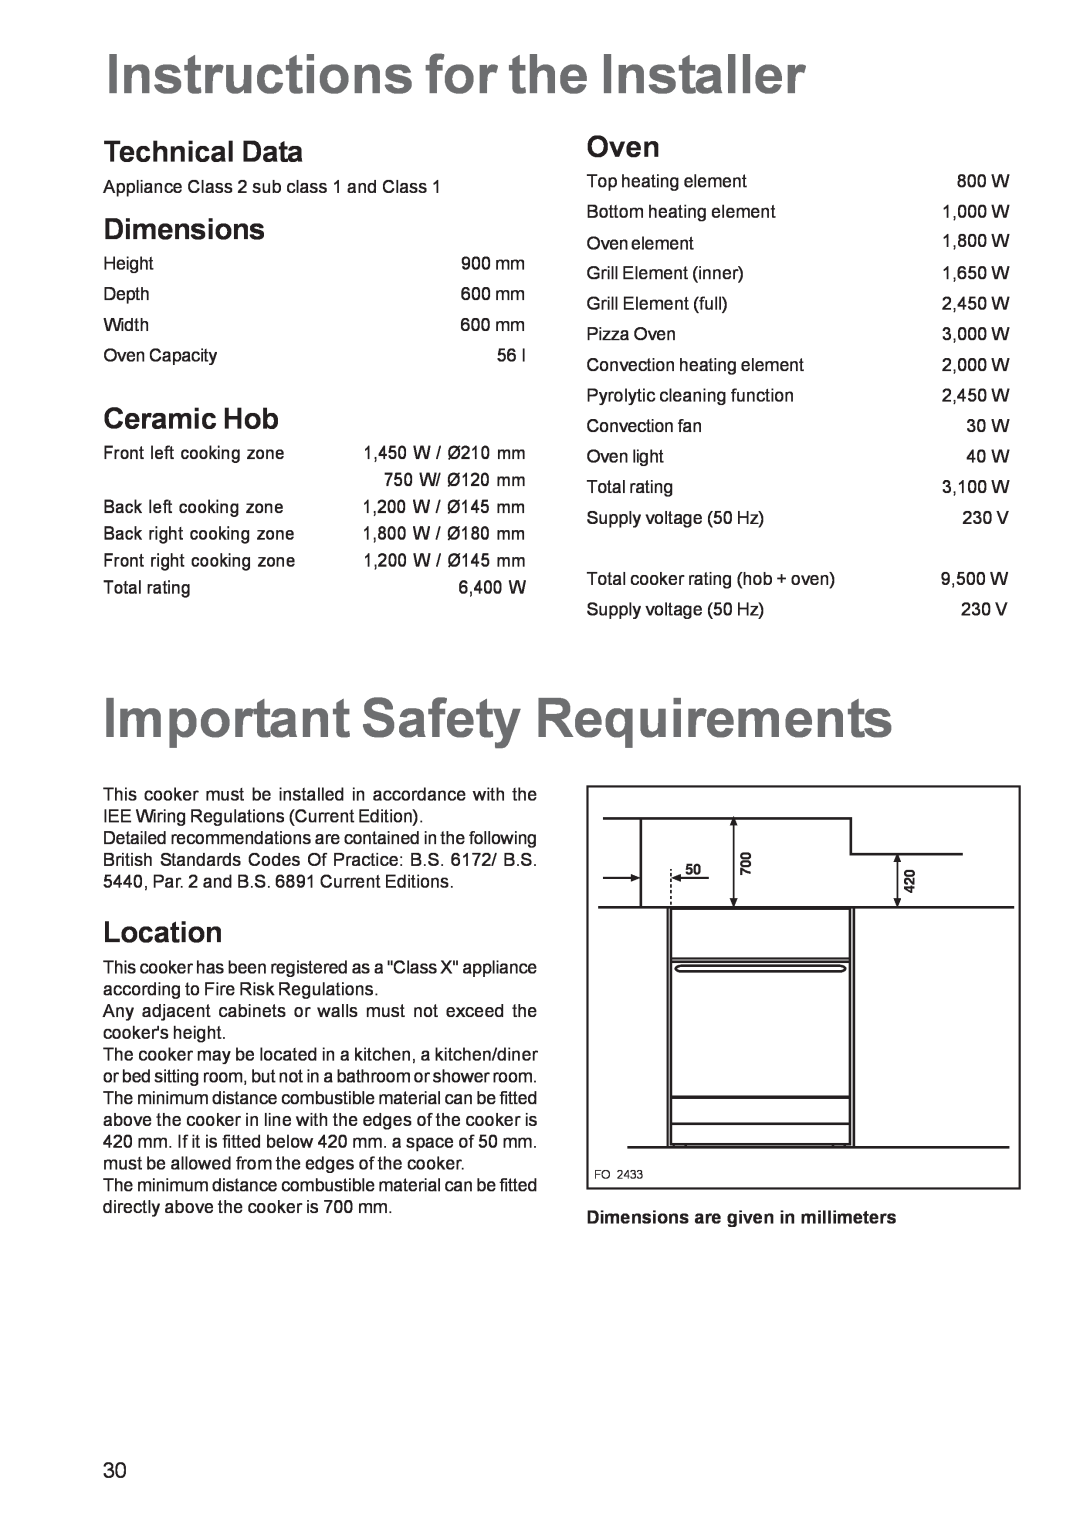 Zanussi ZCE 650 Instructions for the Installer, Important Safety Requirements, Technical Data, Dimensions, Ceramic Hob 